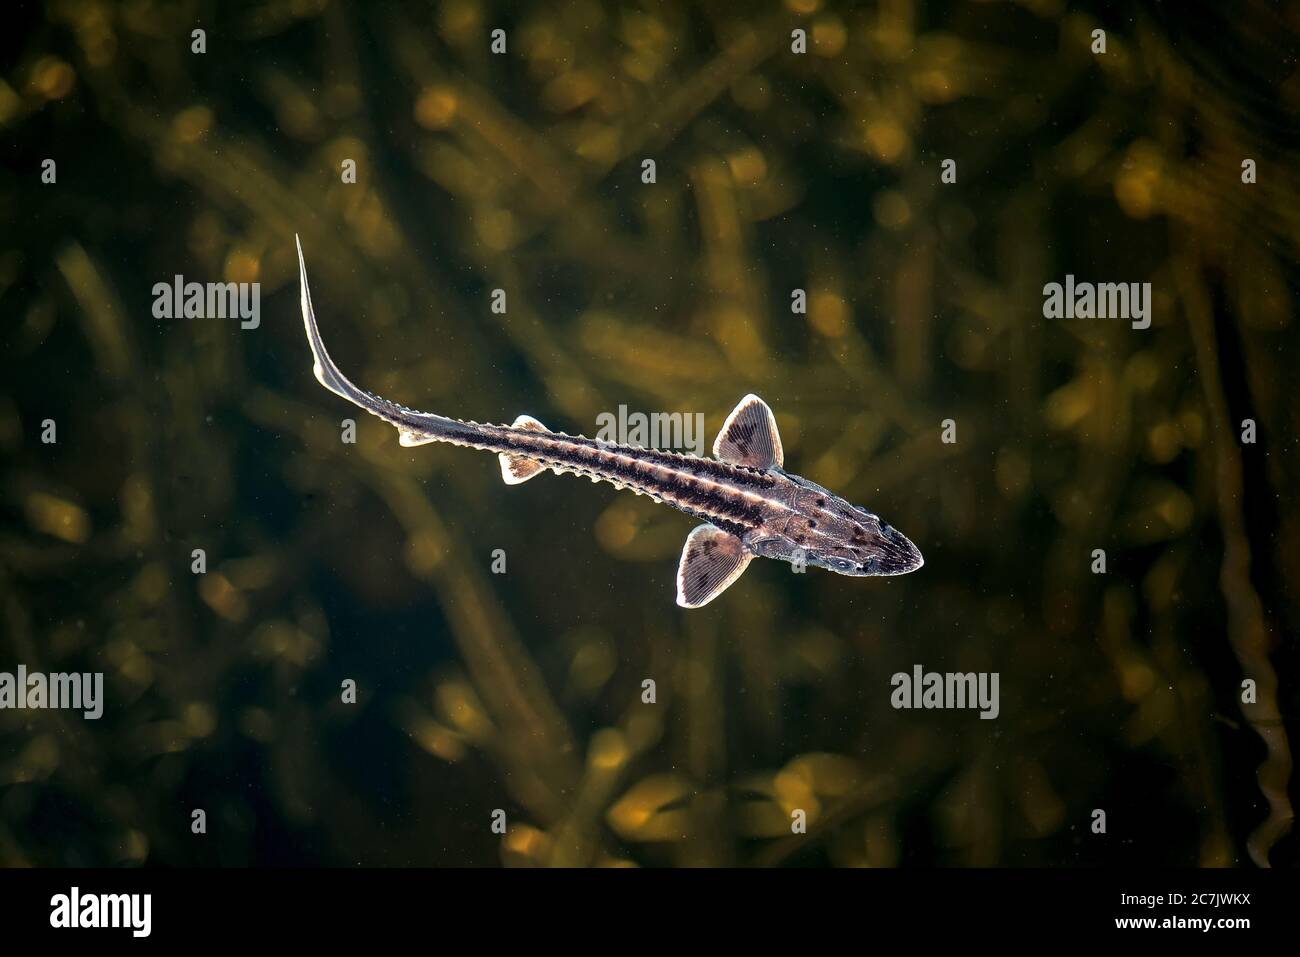 Young Russian sturgeon swimming in their natural habitat - the river Volga. Stock Photo